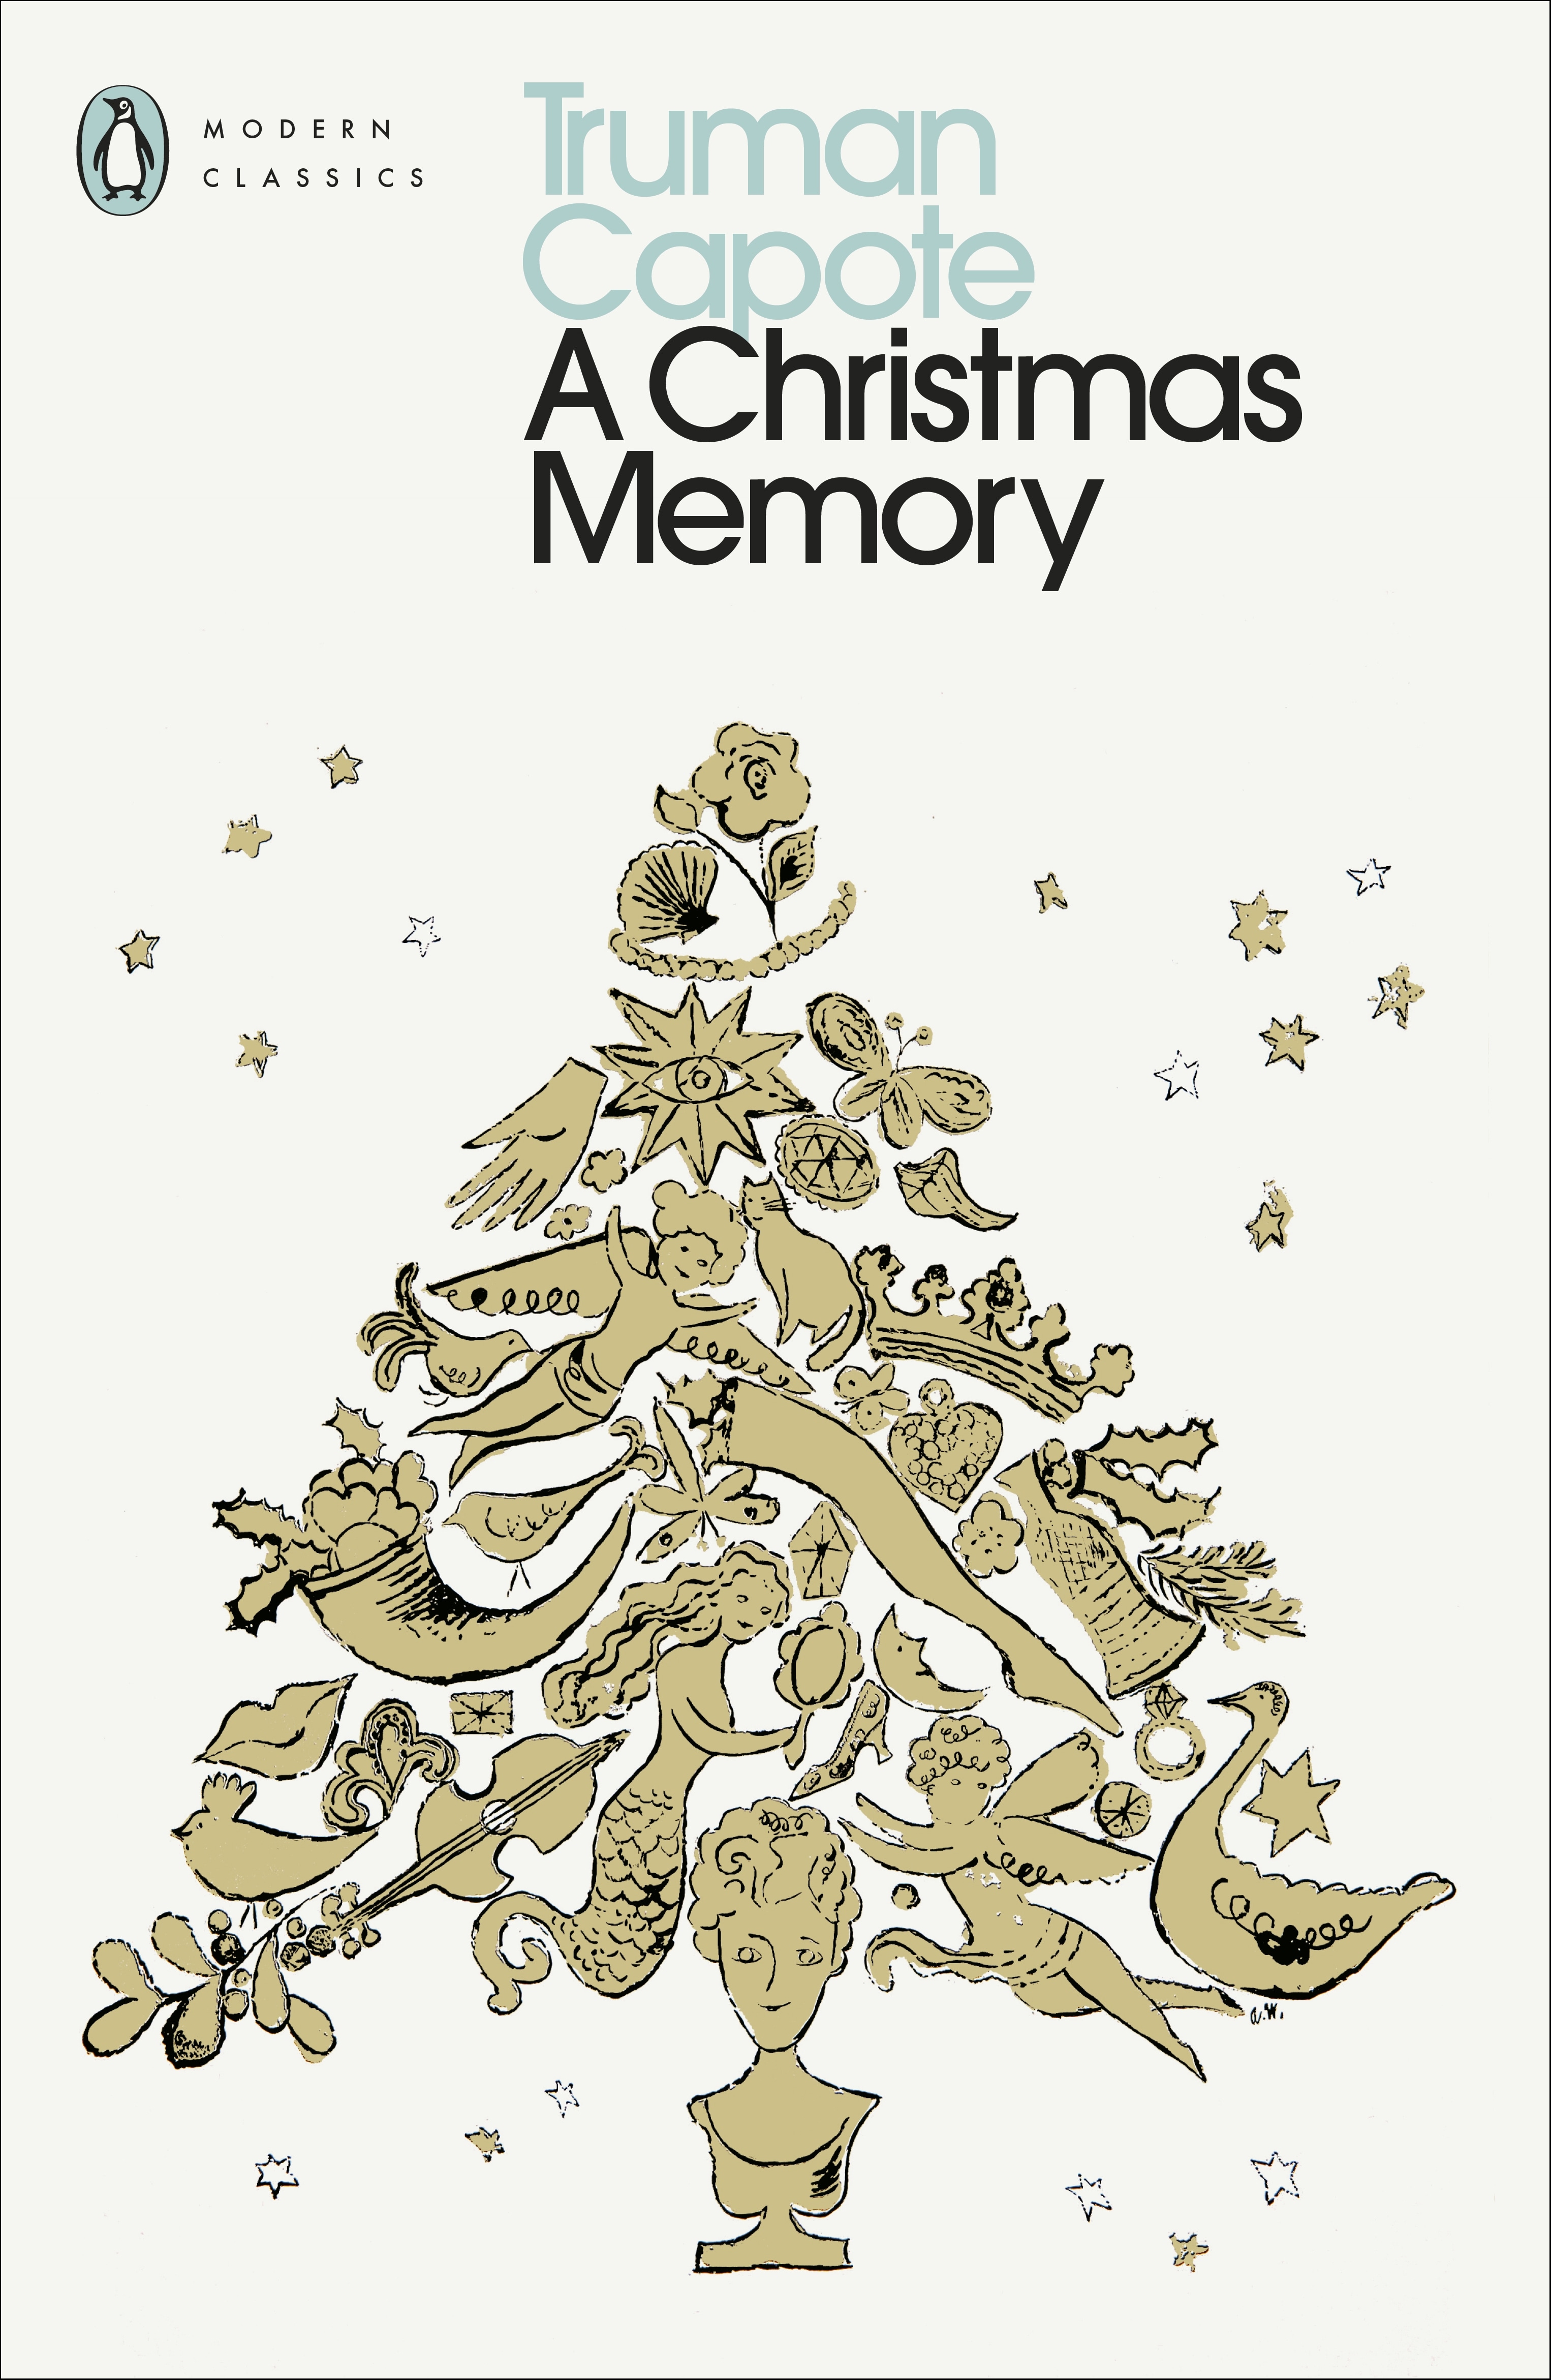 Book “A Christmas Memory” by Truman Capote — October 27, 2022